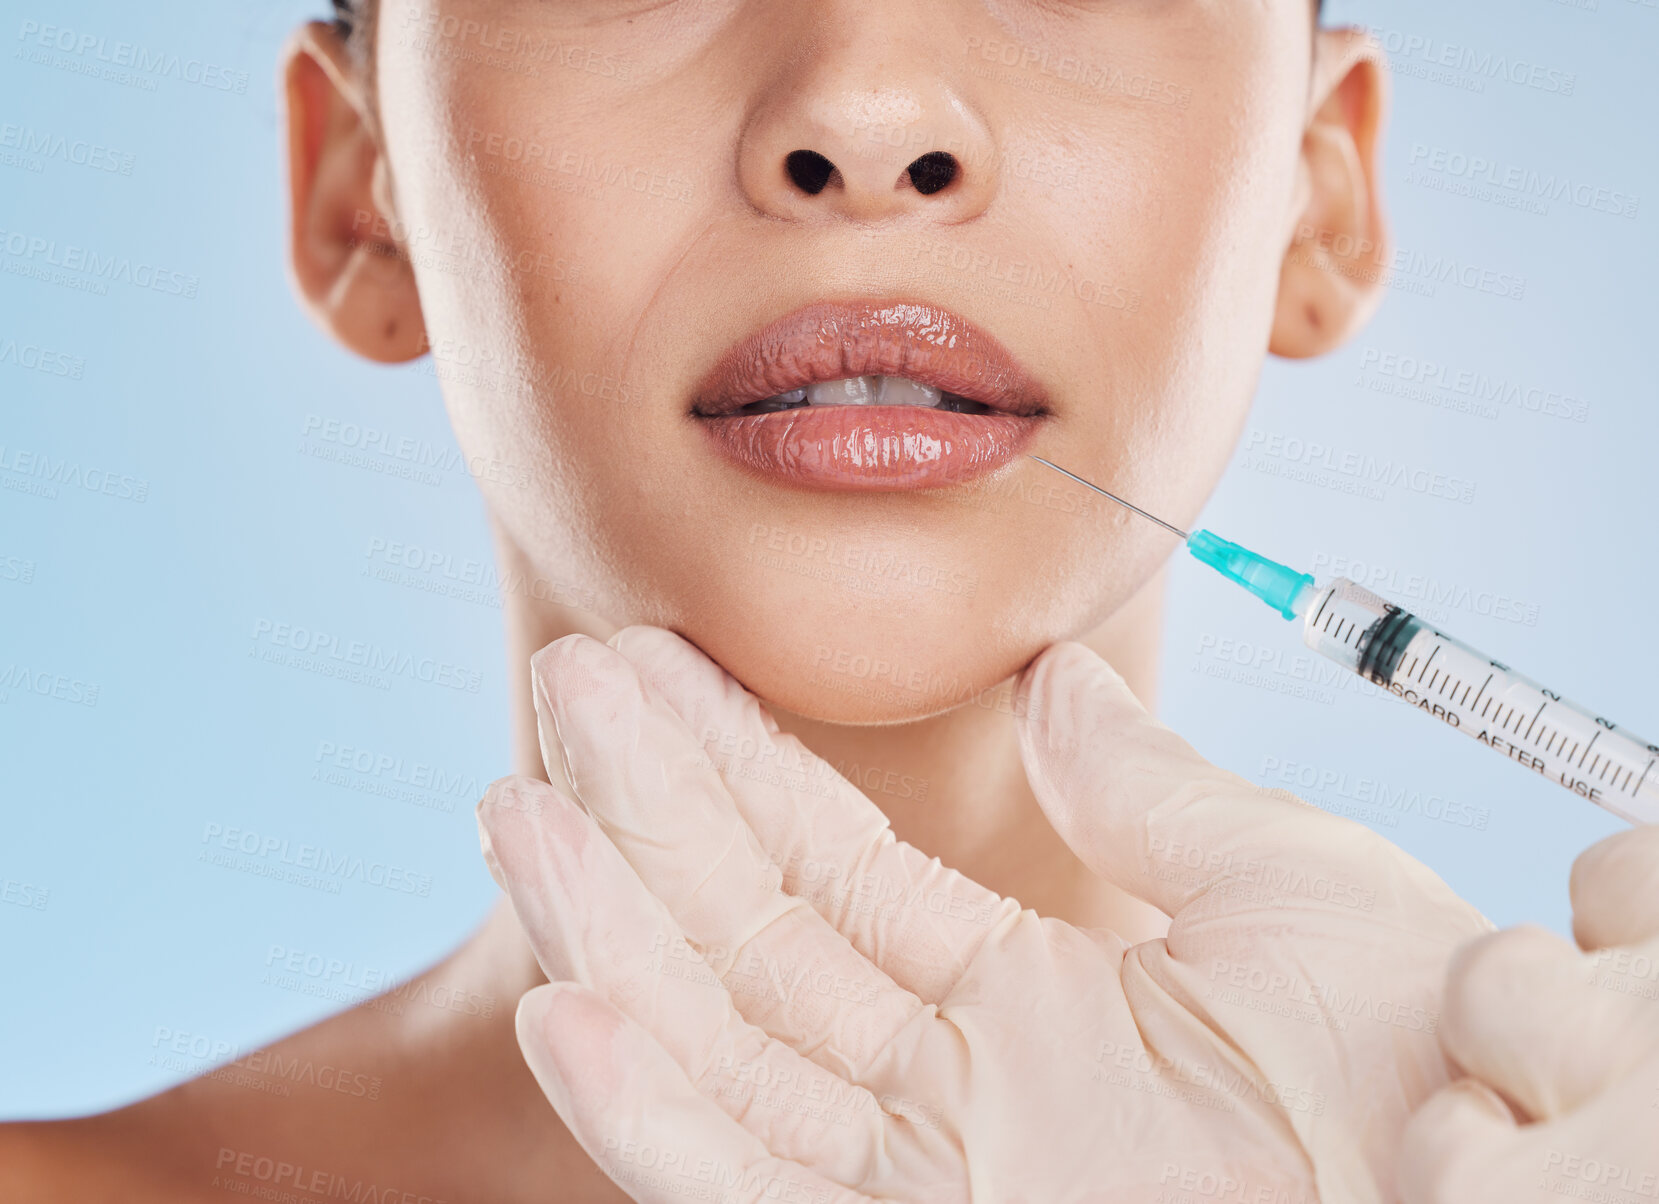 Buy stock photo Plastic surgery, collagen and lip filler for facial beauty aesthetic and medical cosmetic surgery. Hands of face augmentation surgeon or doctor working on patient or client lips with injection needle